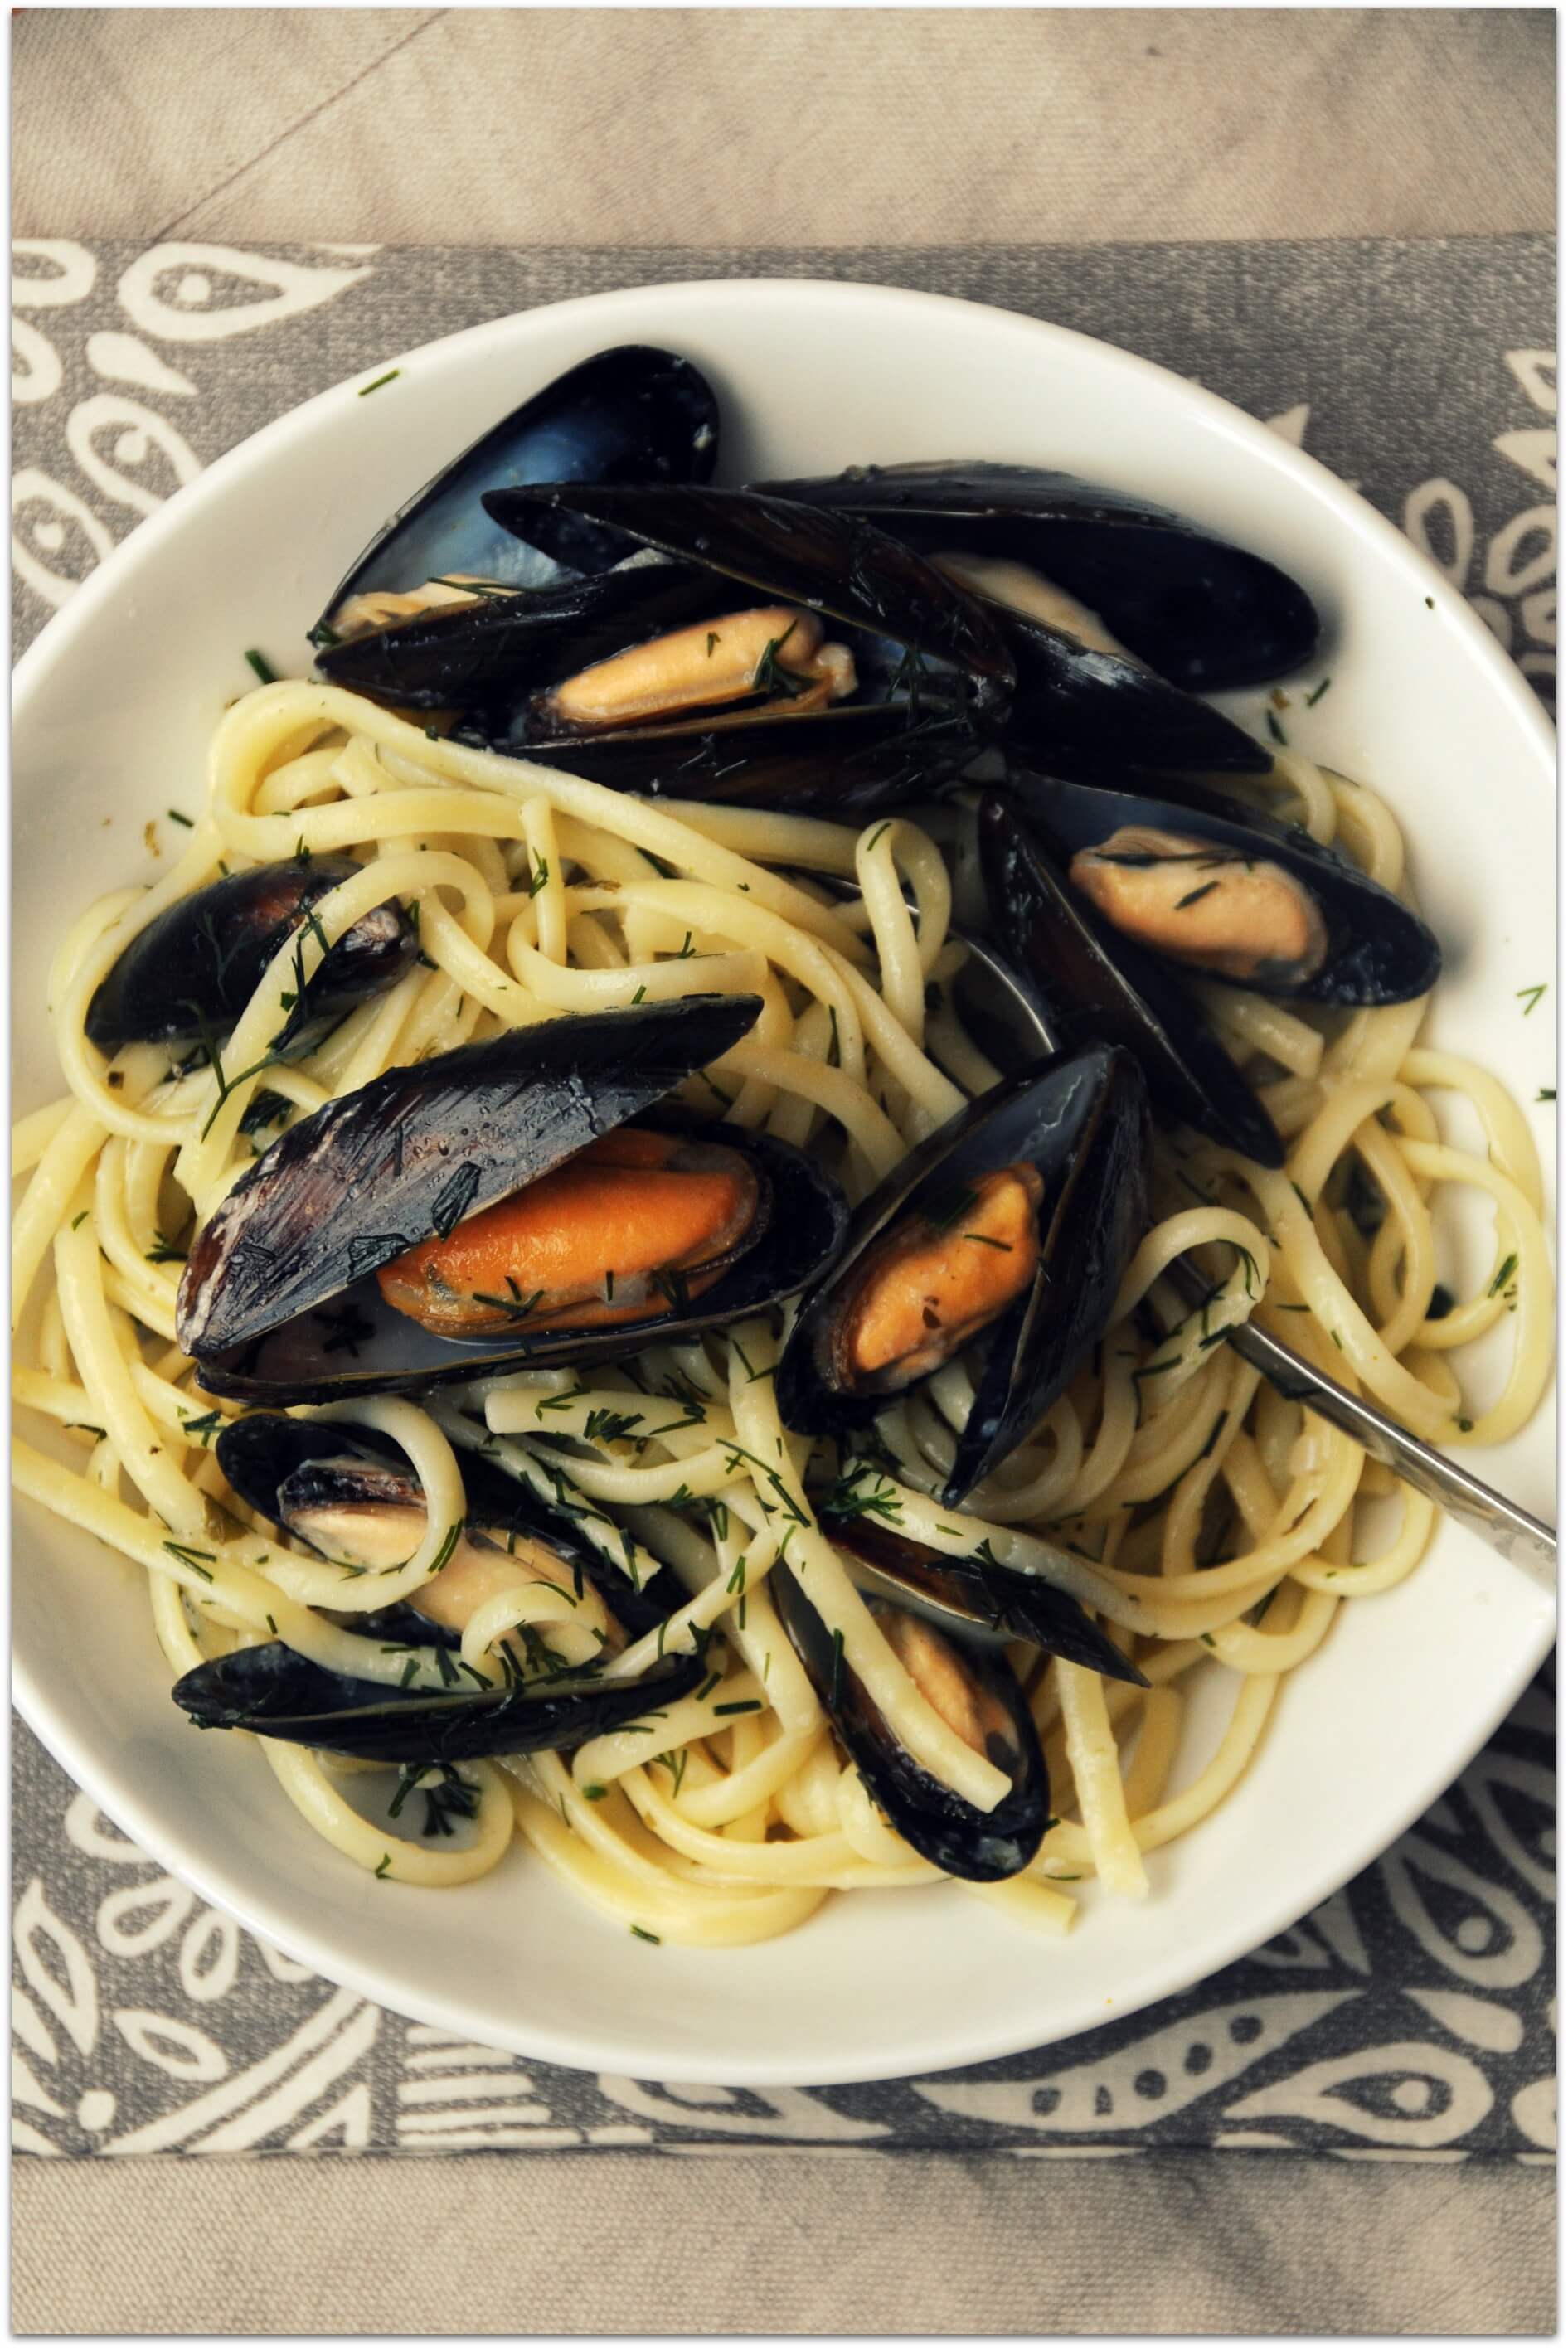 Fish is the Dish: Scottish Mussels with Linguine, Garlic and Dill